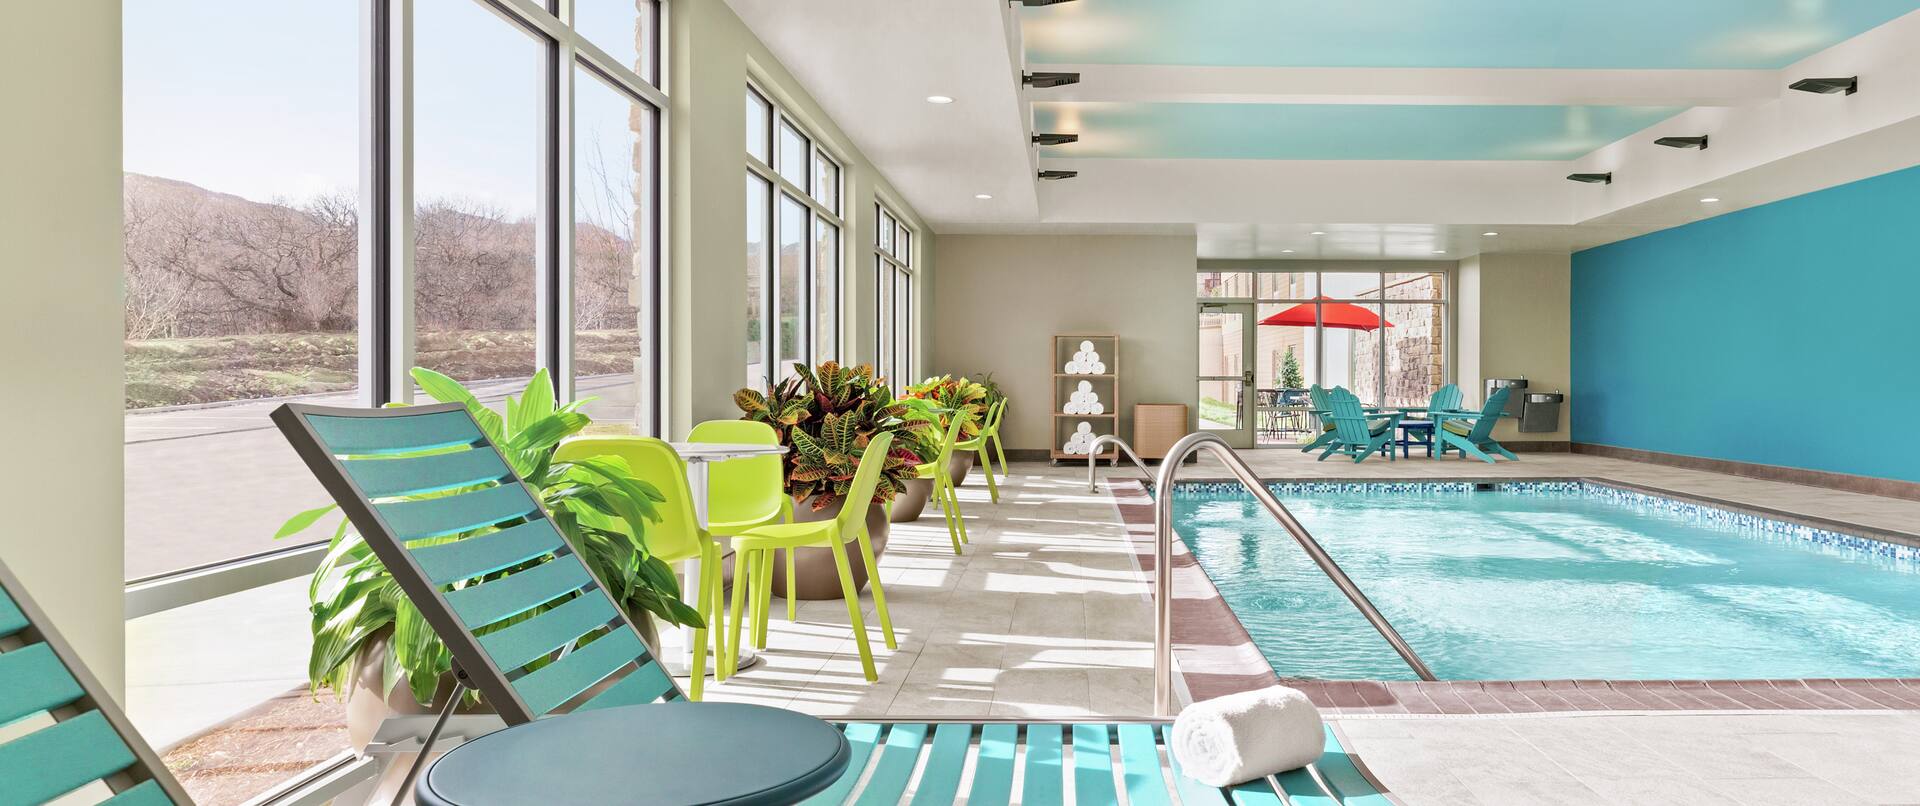 Spacious indoor swimming pool featuring floor to ceiling windows with beautiful mountain view, chaise lounge chairs, lush plants, and complimentary towels.